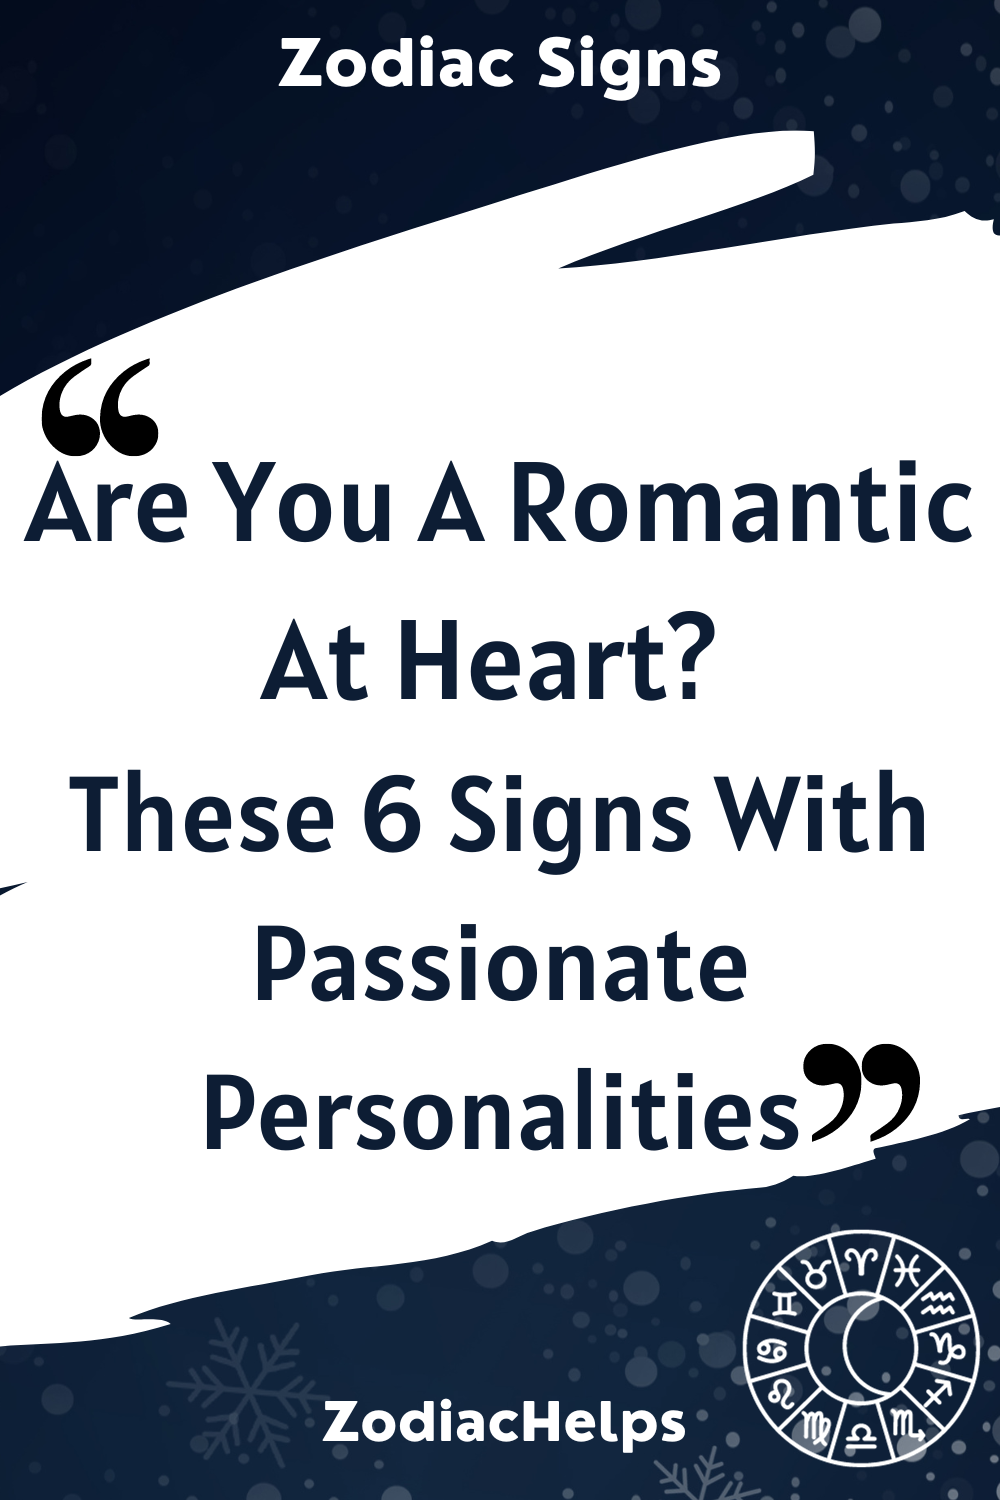 Are You A Romantic At Heart? These 6 Signs With Passionate Personalities